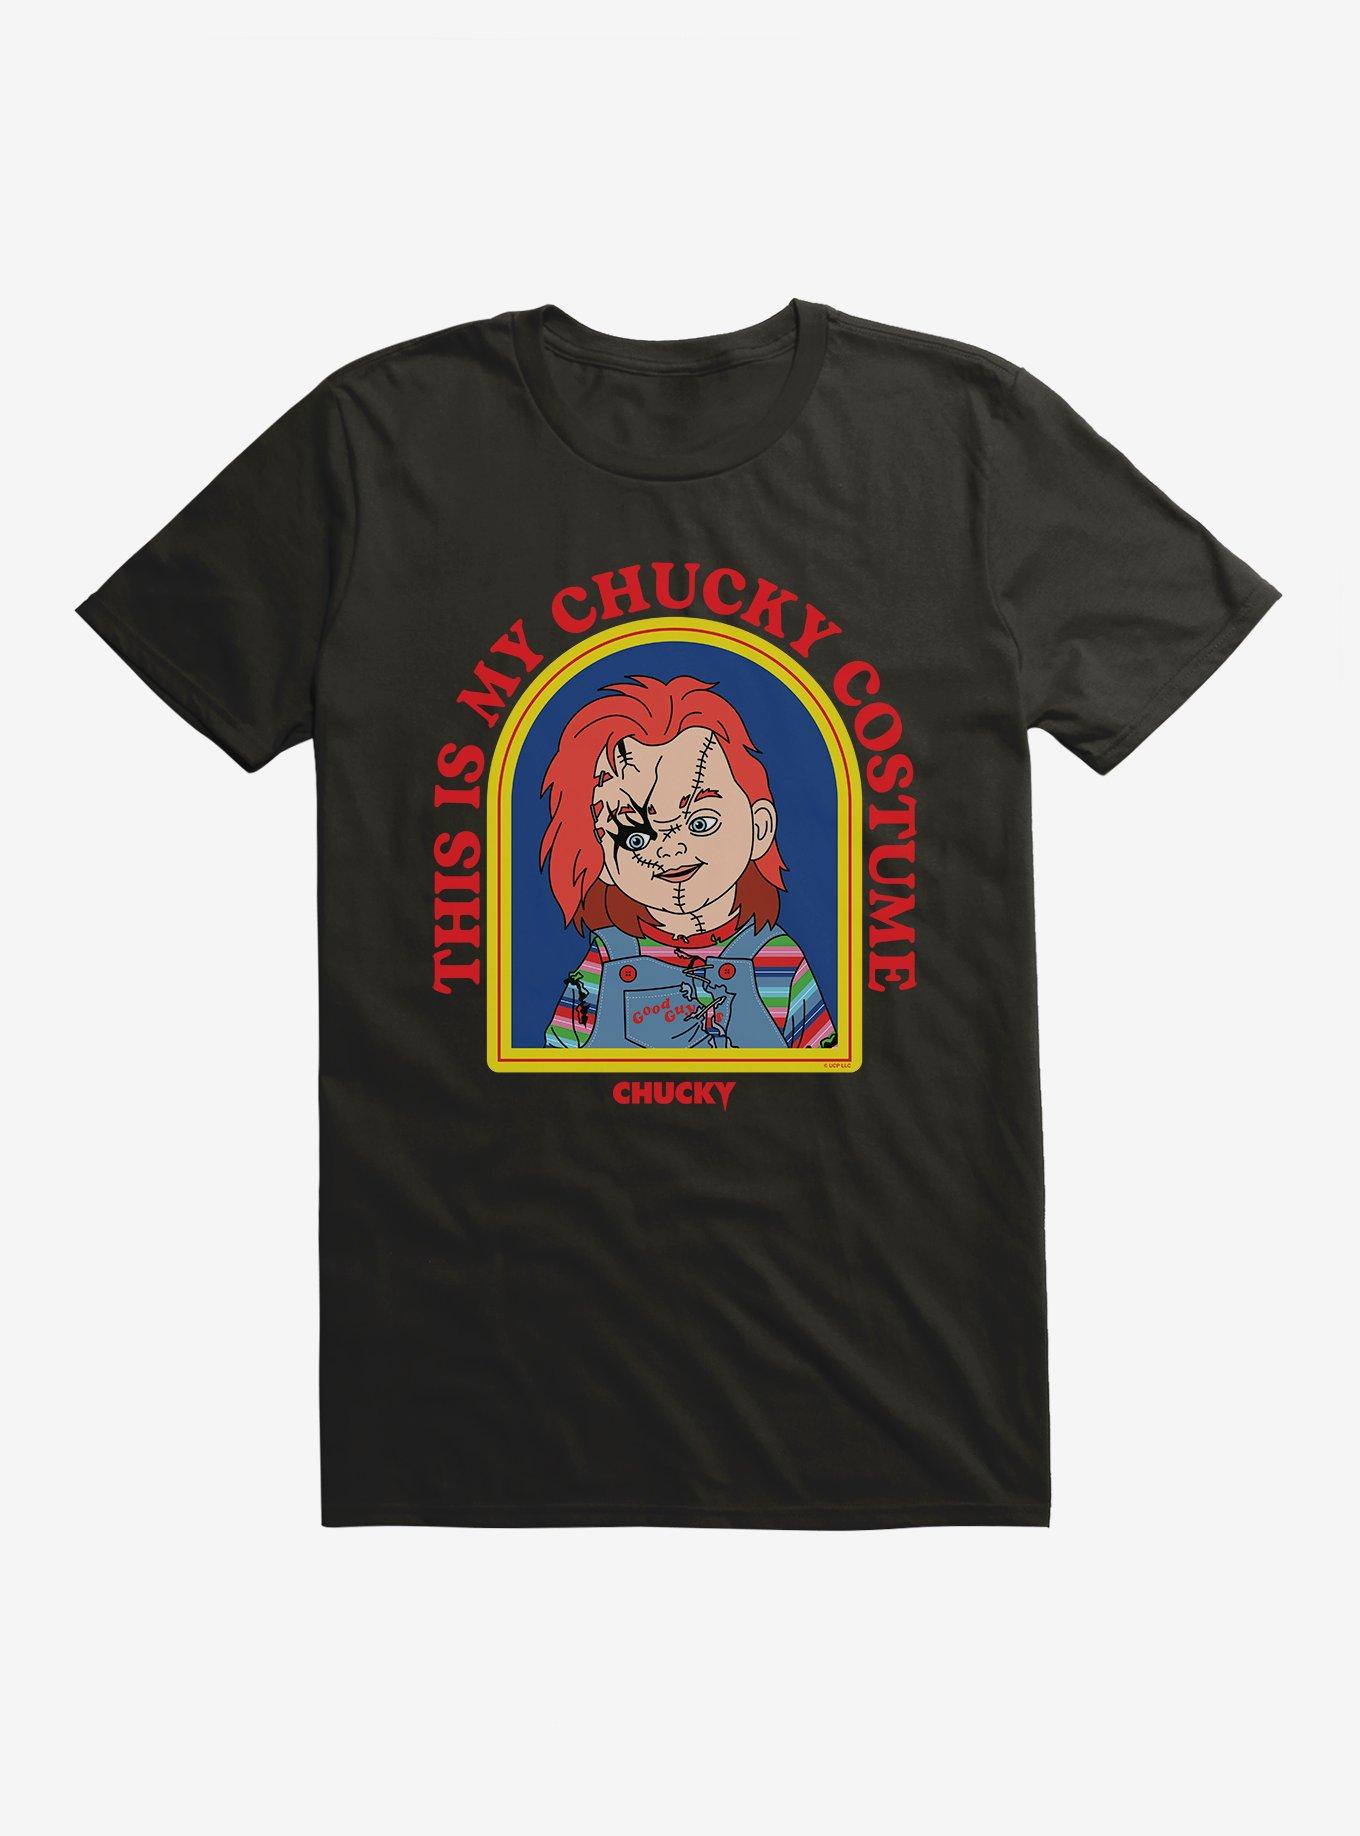 Chucky This Is My Chucky Costume T-Shirt, BLACK, hi-res